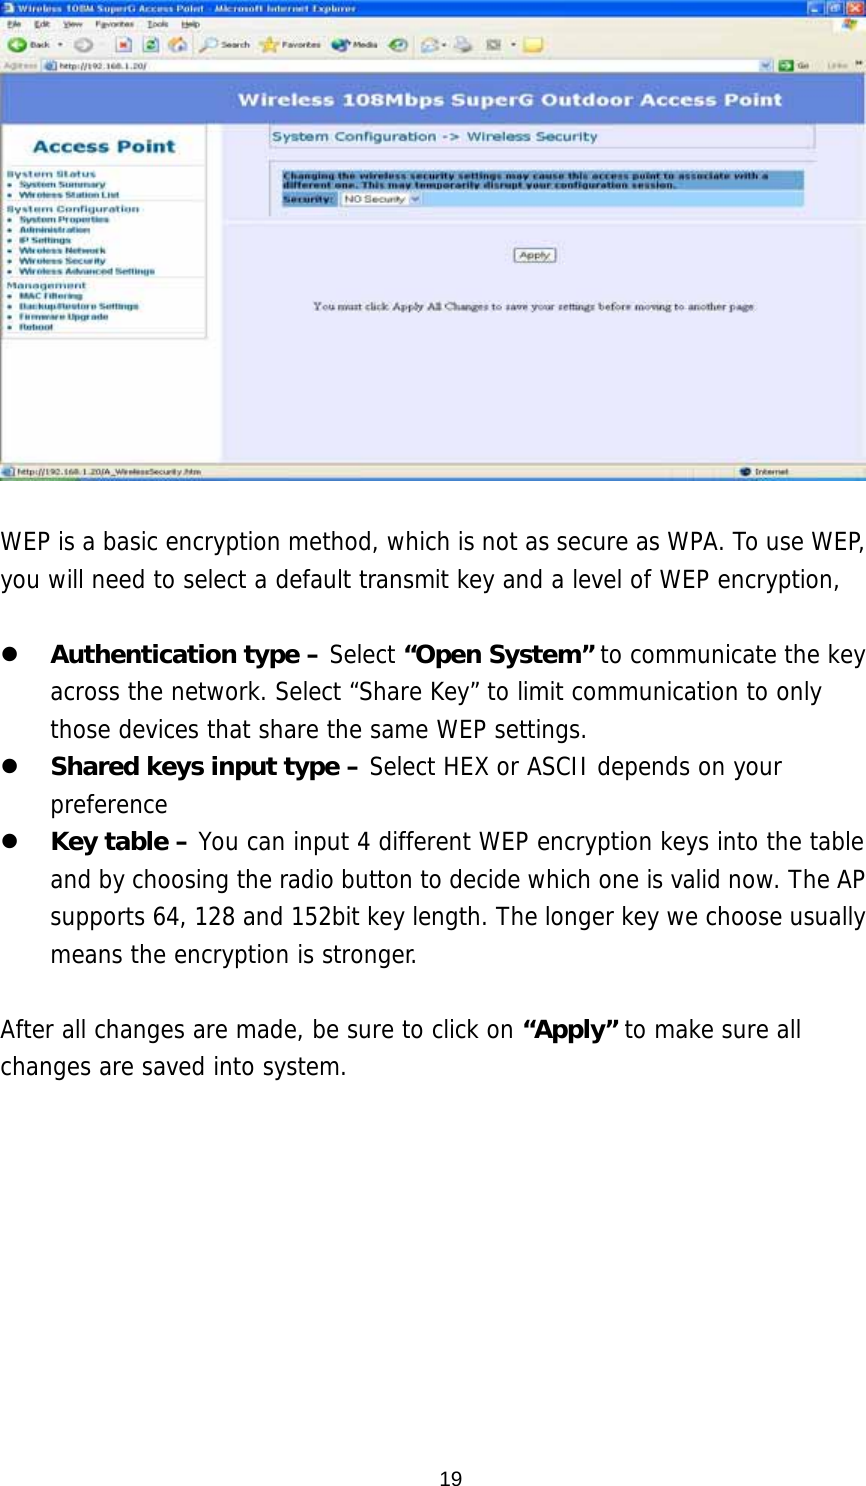  19  WEP is a basic encryption method, which is not as secure as WPA. To use WEP, you will need to select a default transmit key and a level of WEP encryption,     Authentication type – Select “Open System” to communicate the key across the network. Select “Share Key” to limit communication to only those devices that share the same WEP settings.    Shared keys input type – Select HEX or ASCII depends on your preference   Key table – You can input 4 different WEP encryption keys into the table and by choosing the radio button to decide which one is valid now. The AP supports 64, 128 and 152bit key length. The longer key we choose usually means the encryption is stronger.  After all changes are made, be sure to click on “Apply” to make sure all changes are saved into system.  